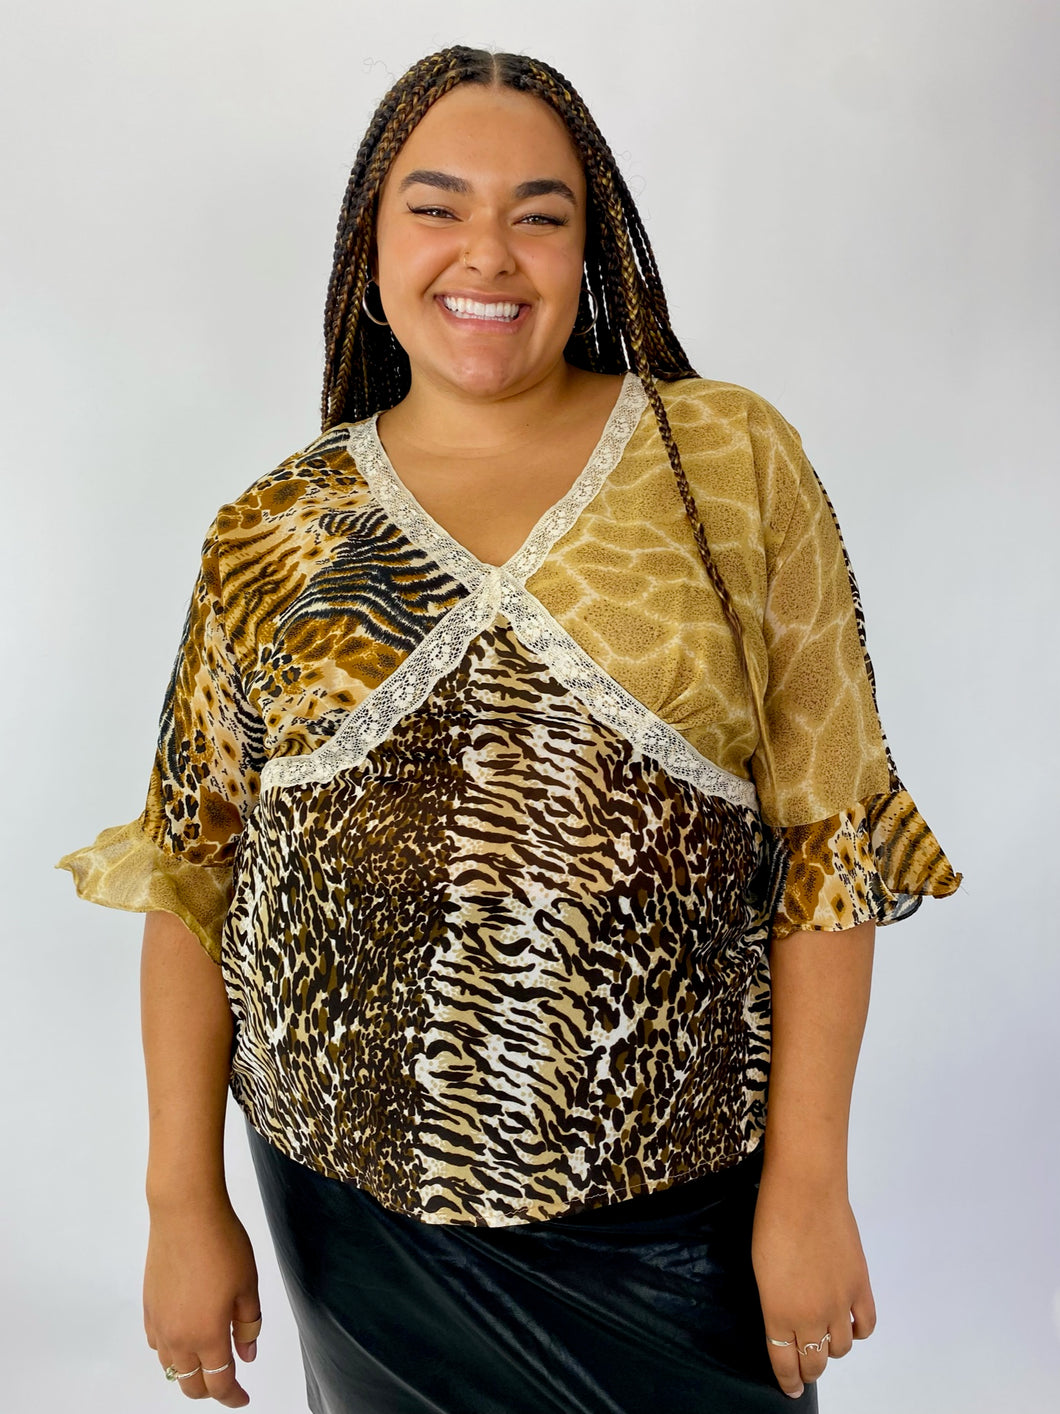 Speed Limit NYC Vintage Brown and Yellow Mixed Animal Print Blouse, Size 3X